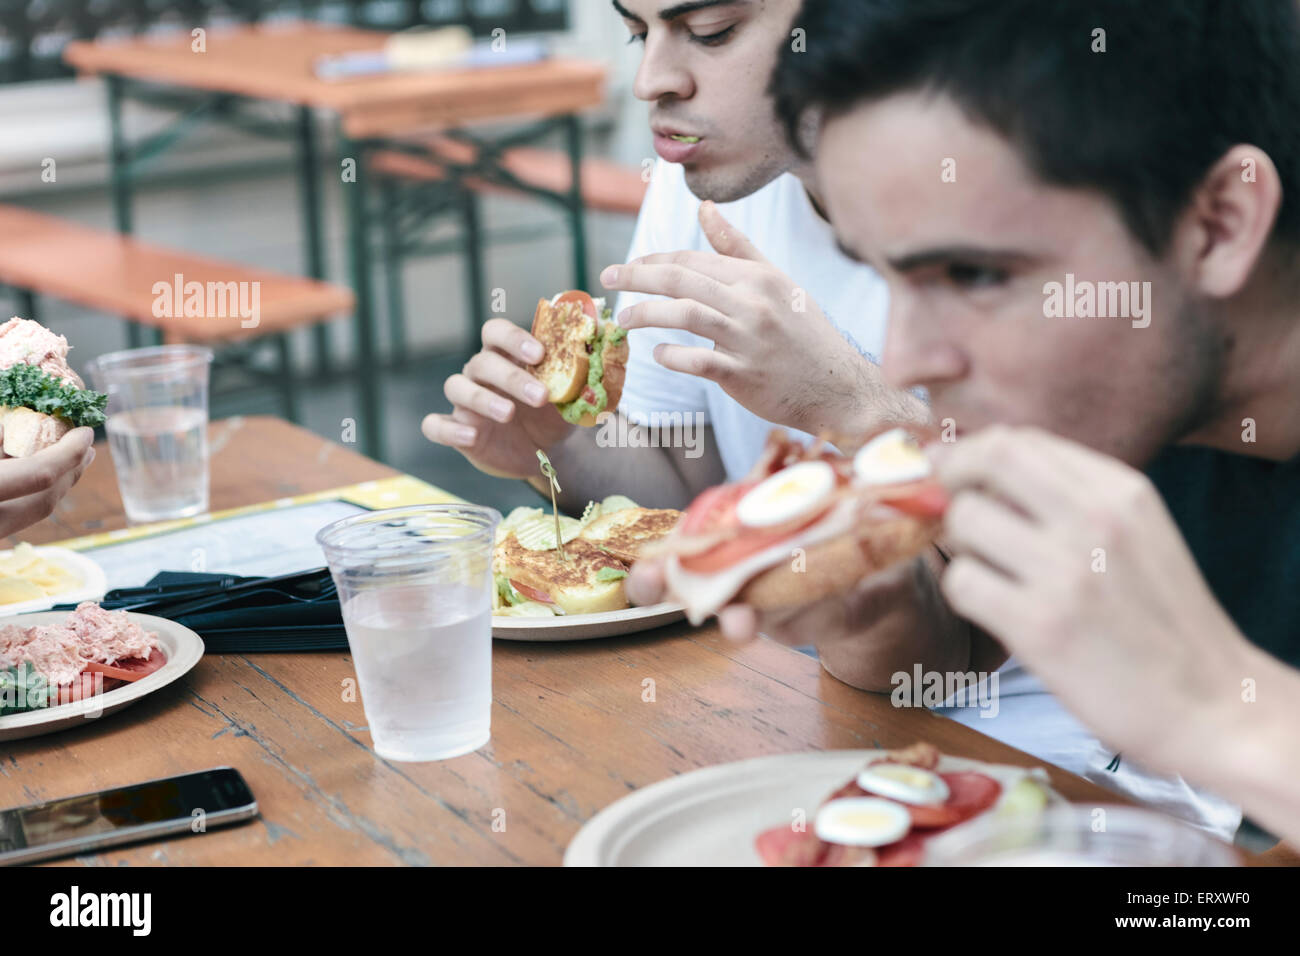 Friends having meal in public outdoor seating in New York's financial district Stock Photo